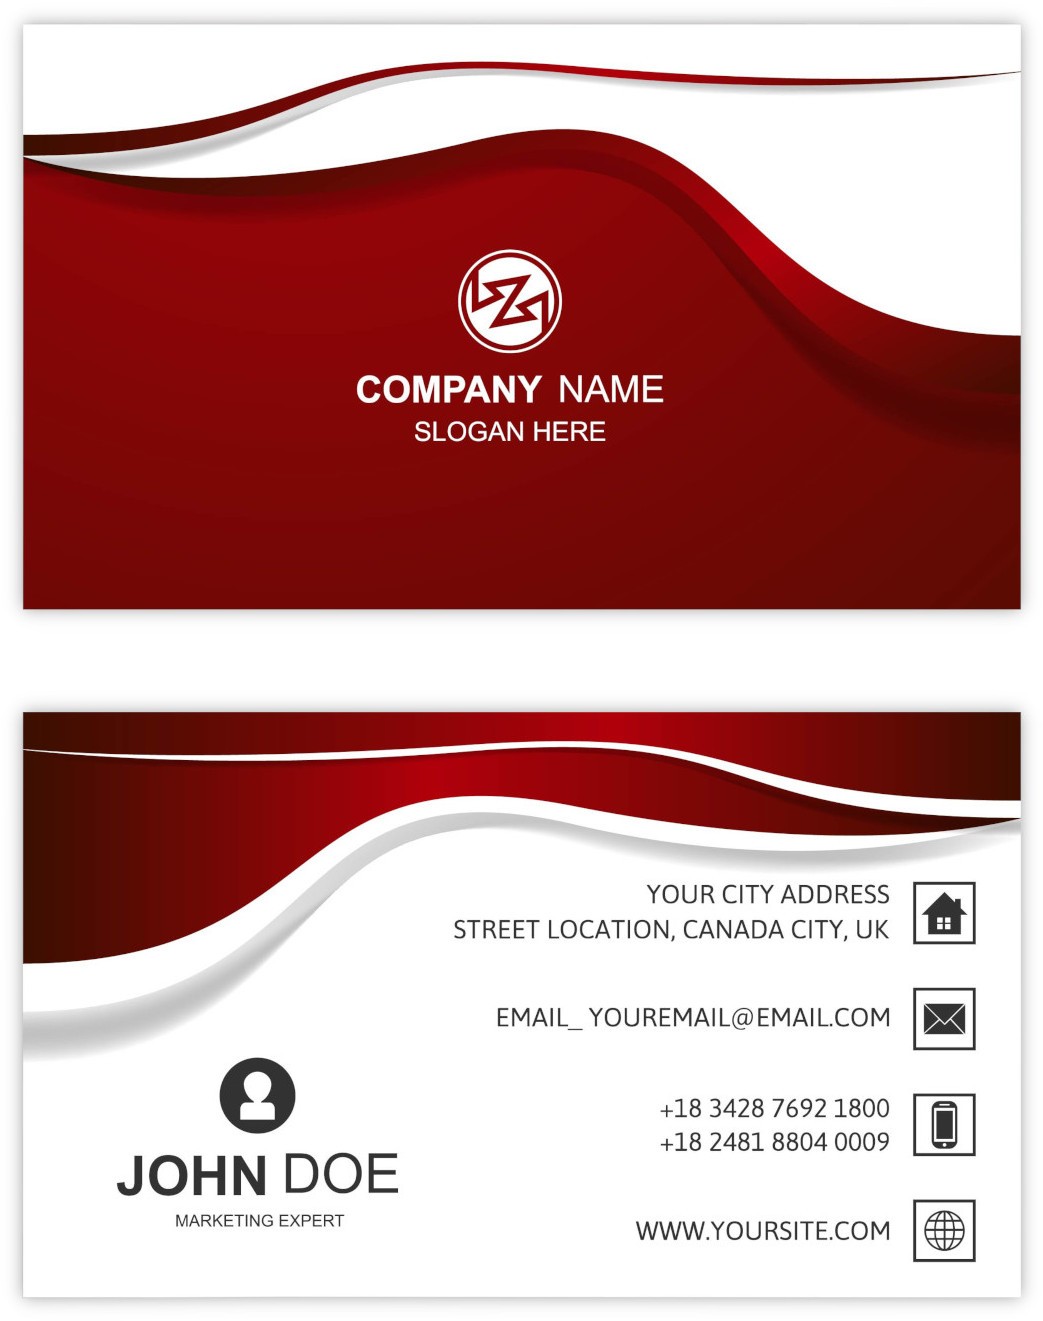 Augmented reality printing - Business cards